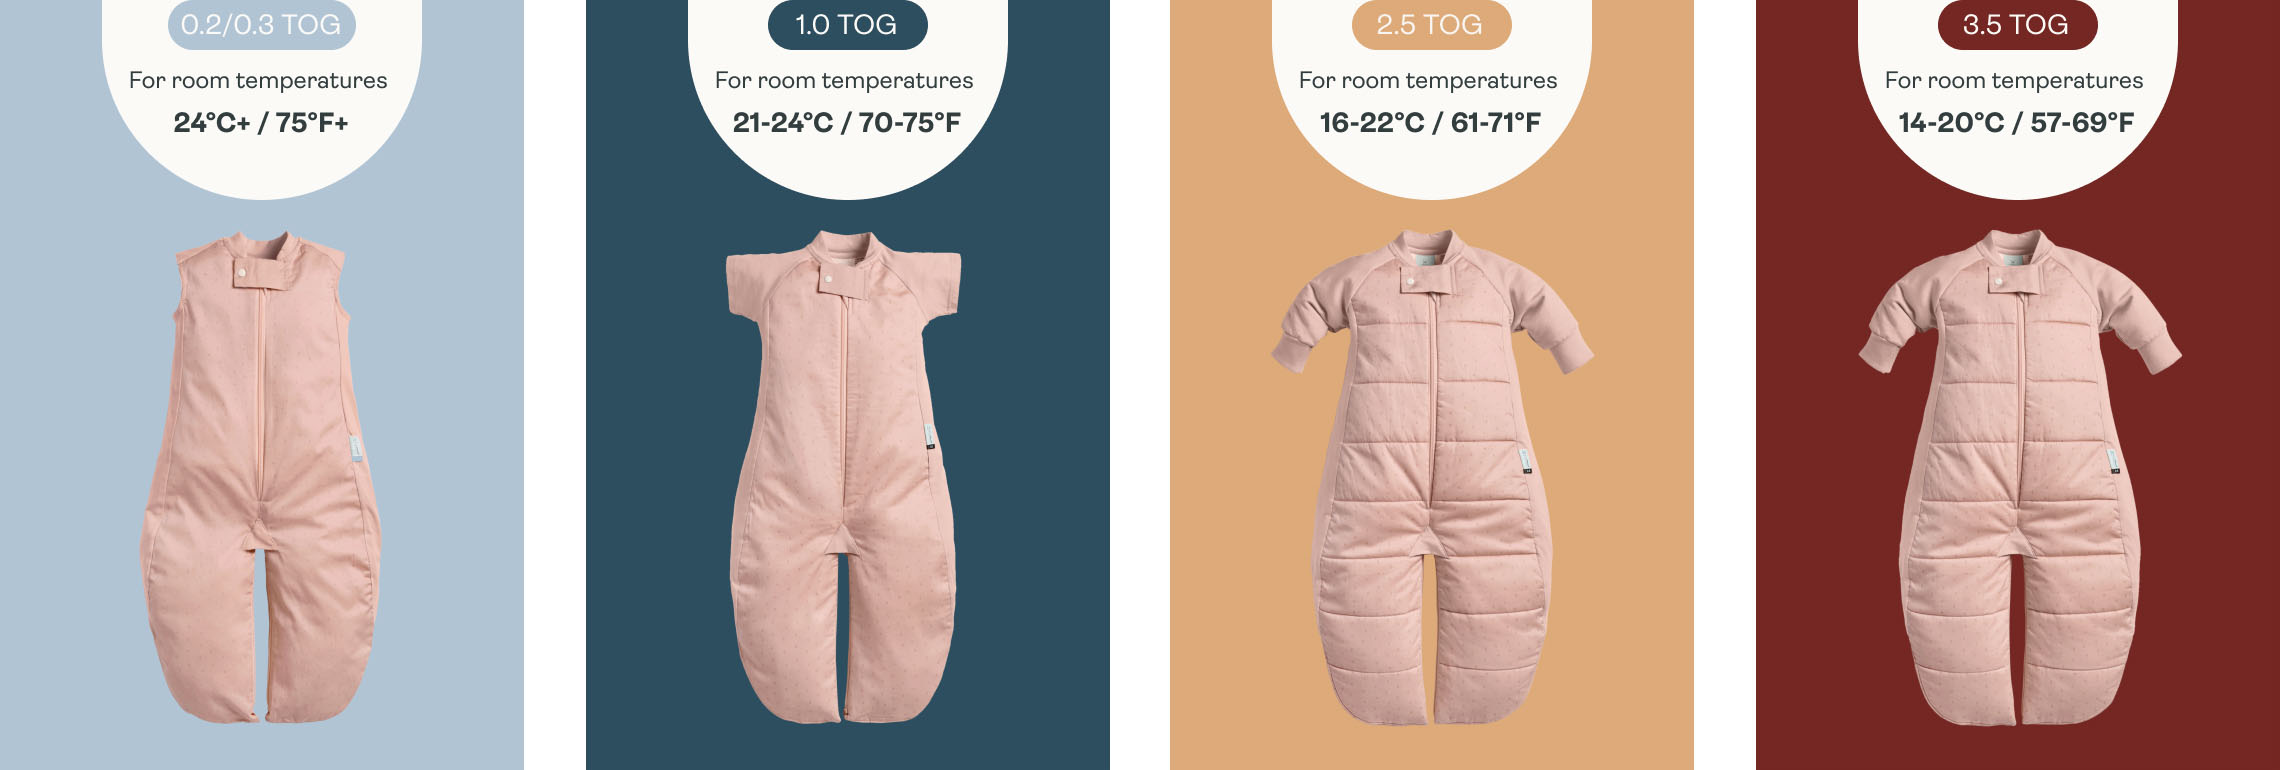 TOG options for the ergoPouch Sleep Suit Sack